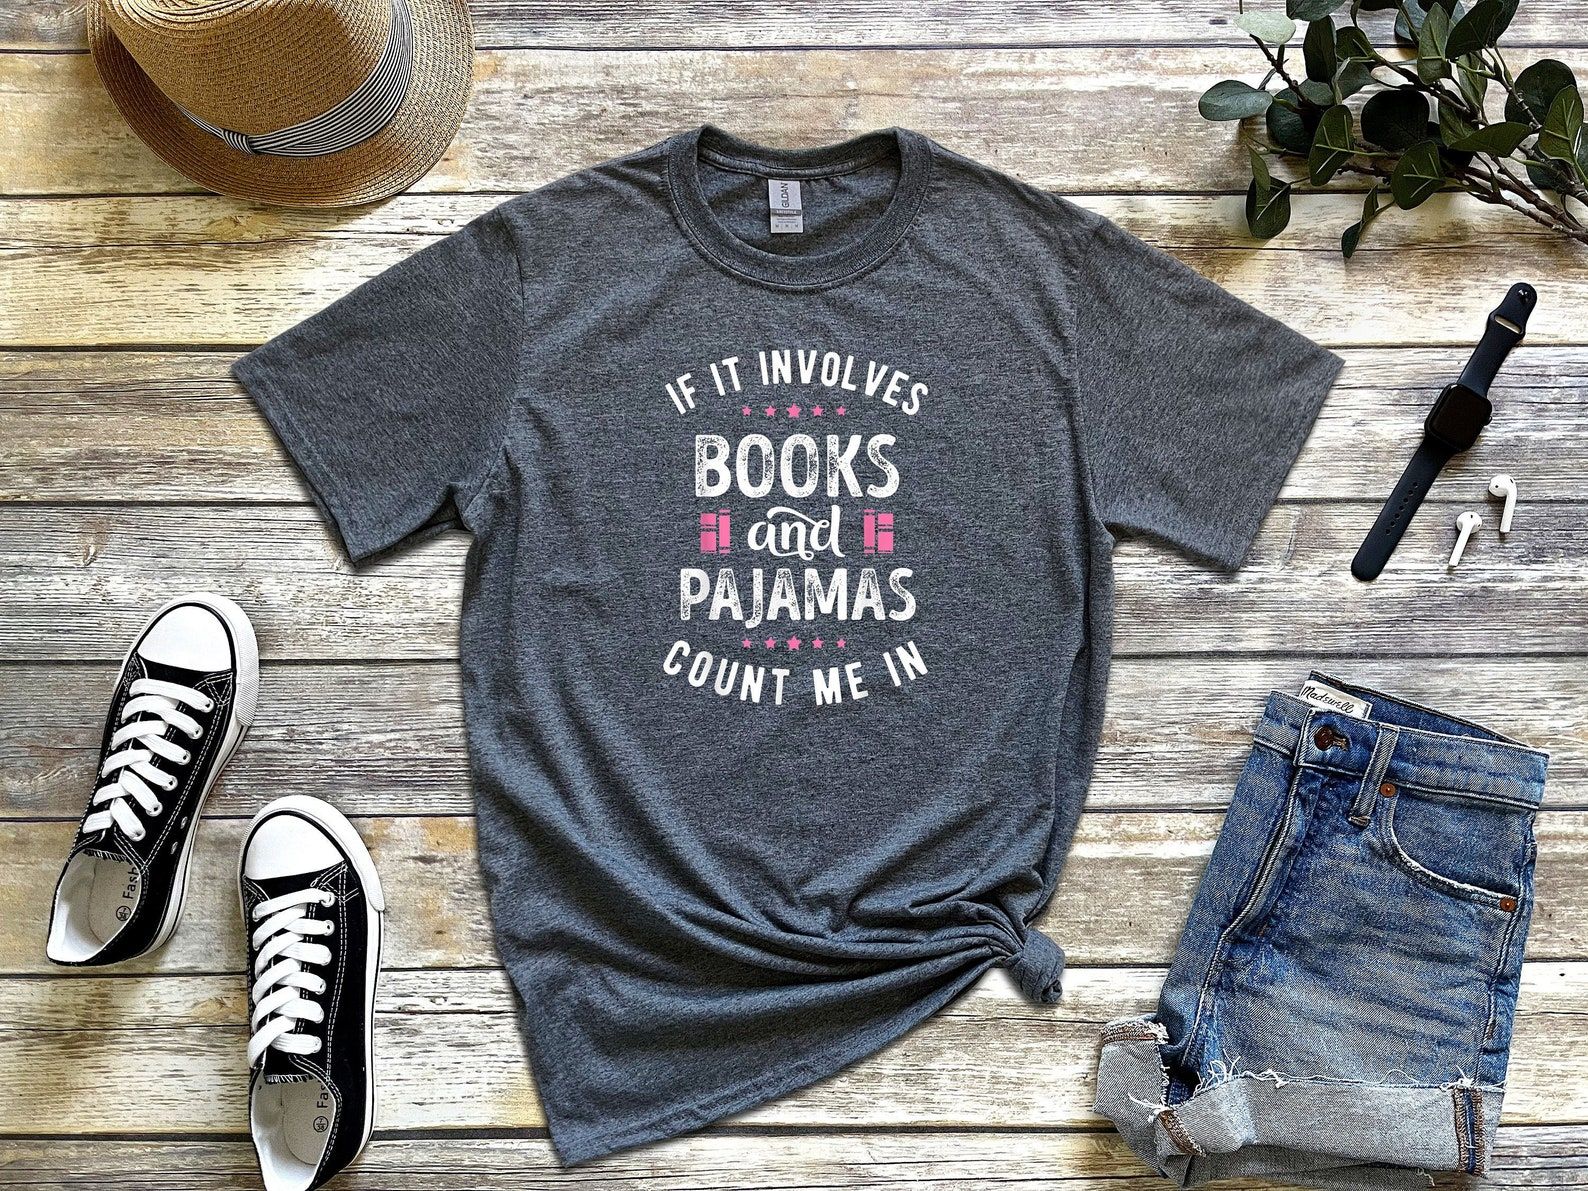 Gray t-shirt that reads If It involves books and pajamas, count me in